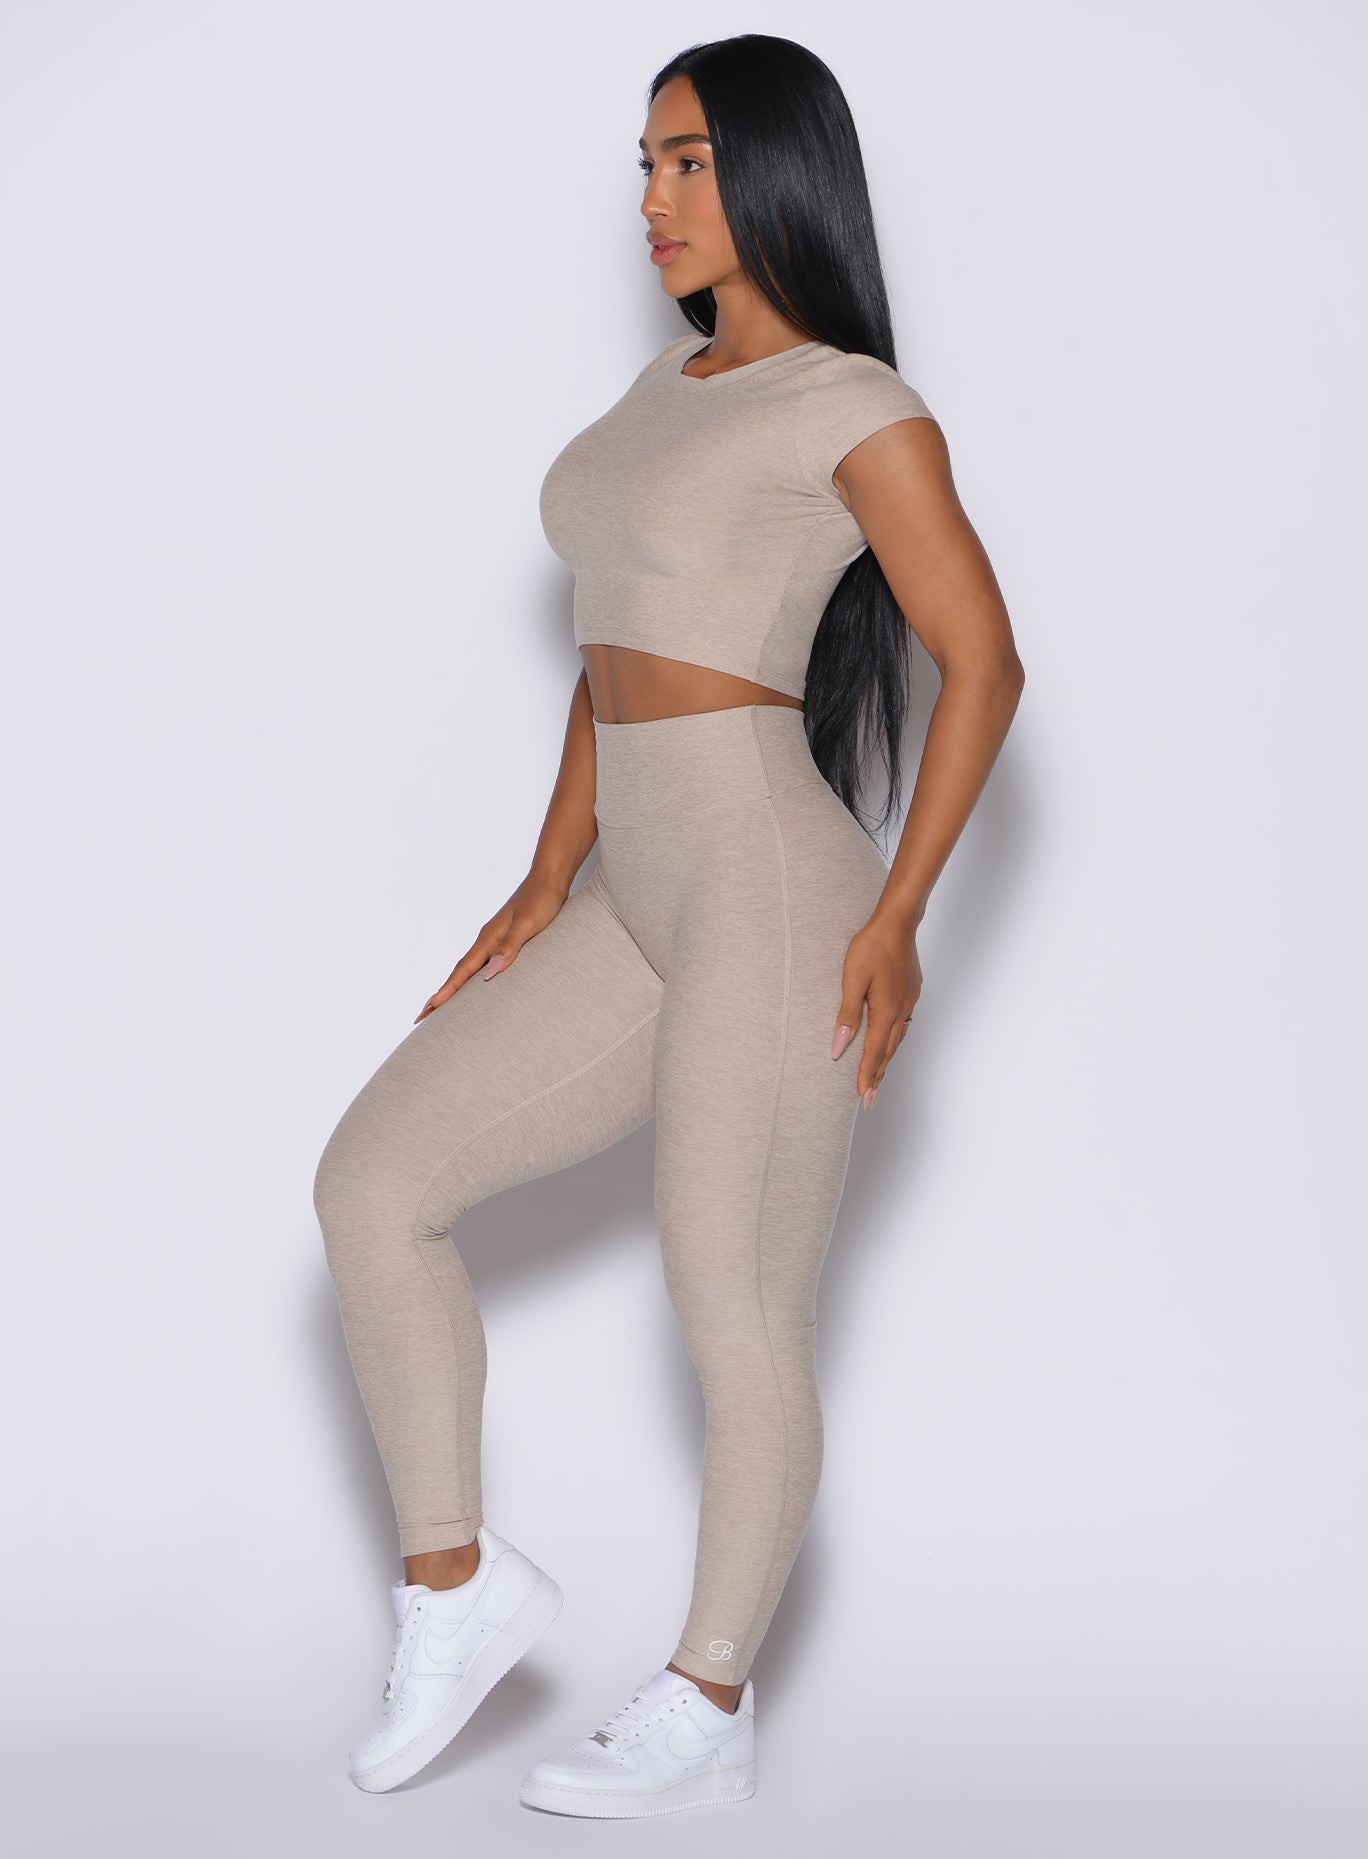 Right side view of a model in our Movement Leggings in Taupe color and a matching Tee 